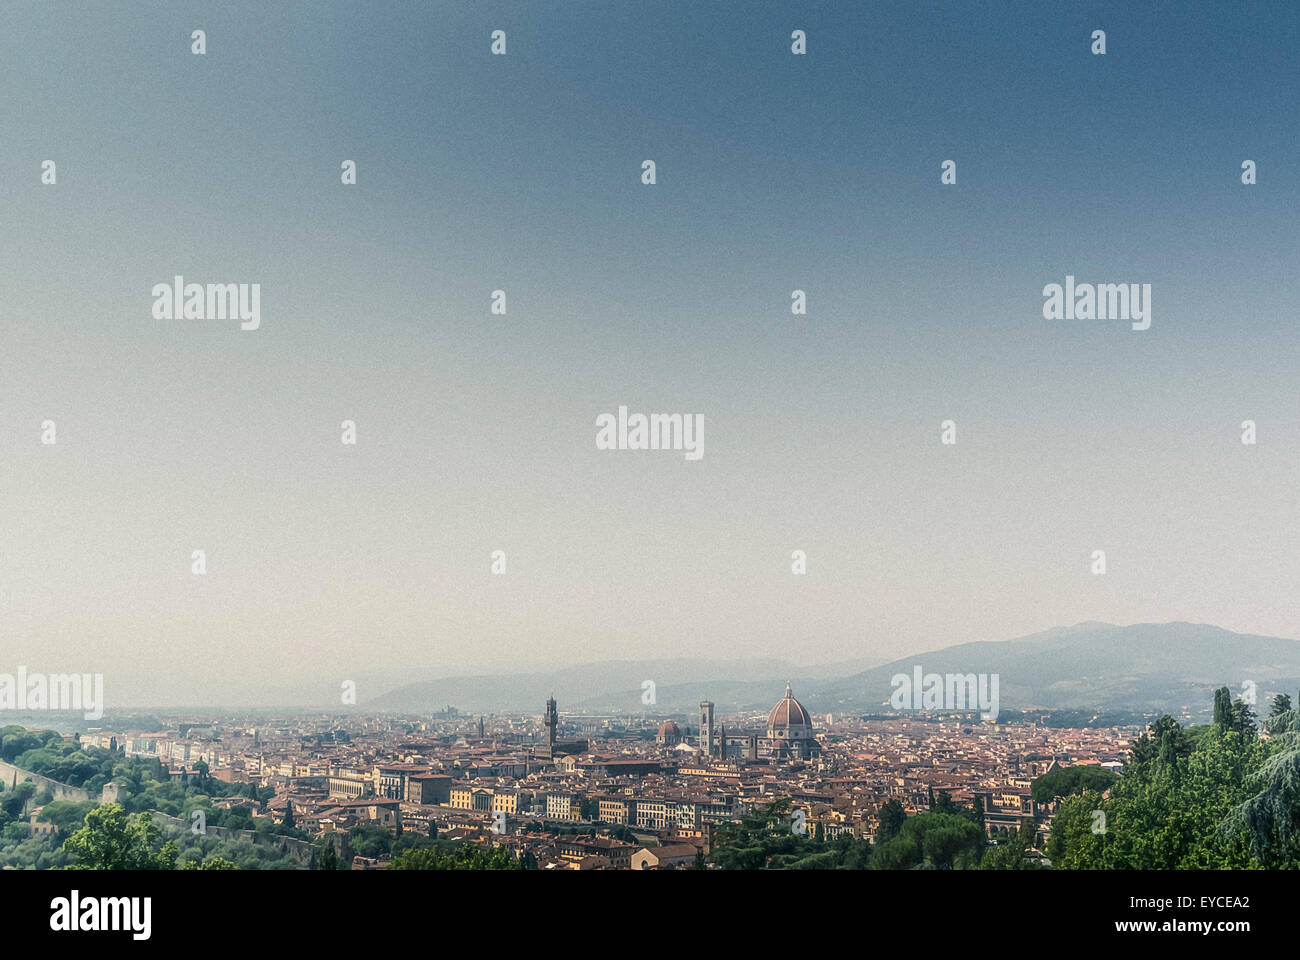 Florence Cathedral or Duomo with dome designed by Filippo Brunelleschi. Florence, Italy. Stock Photo